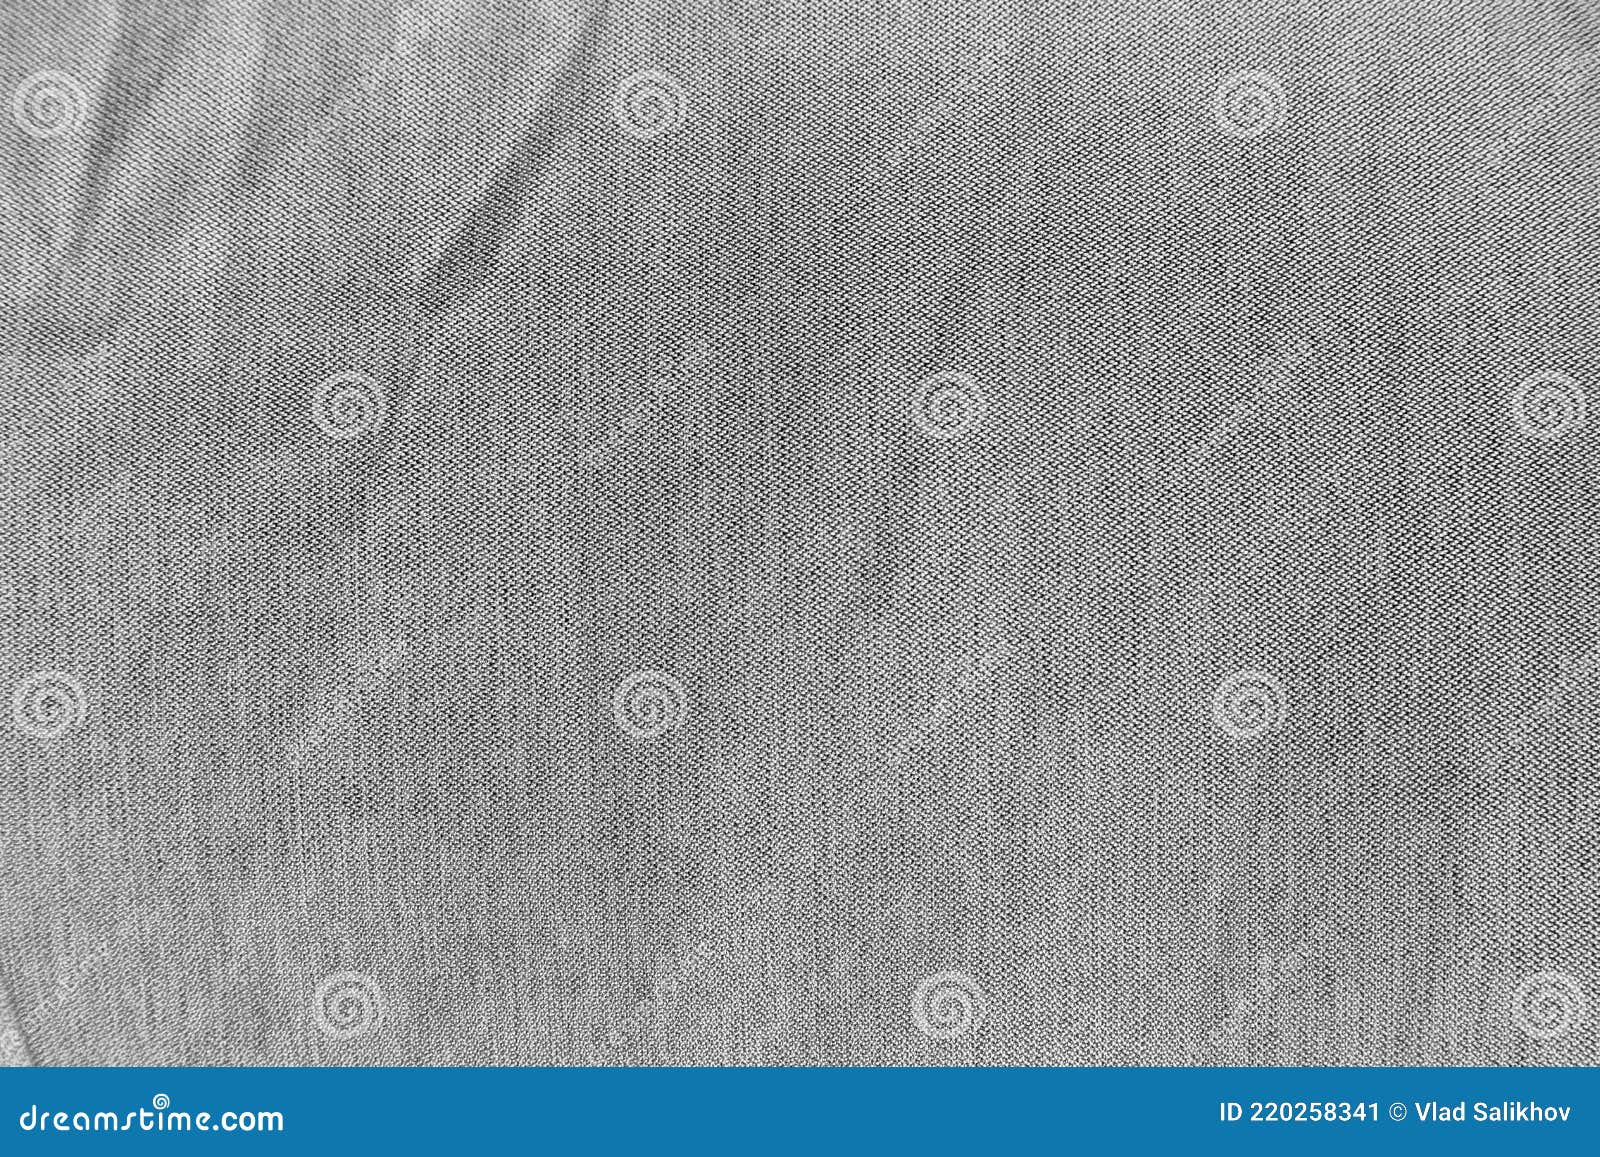 Gray Nylon Texture. Synthetic Fabric Stock Image - Image of textured ...